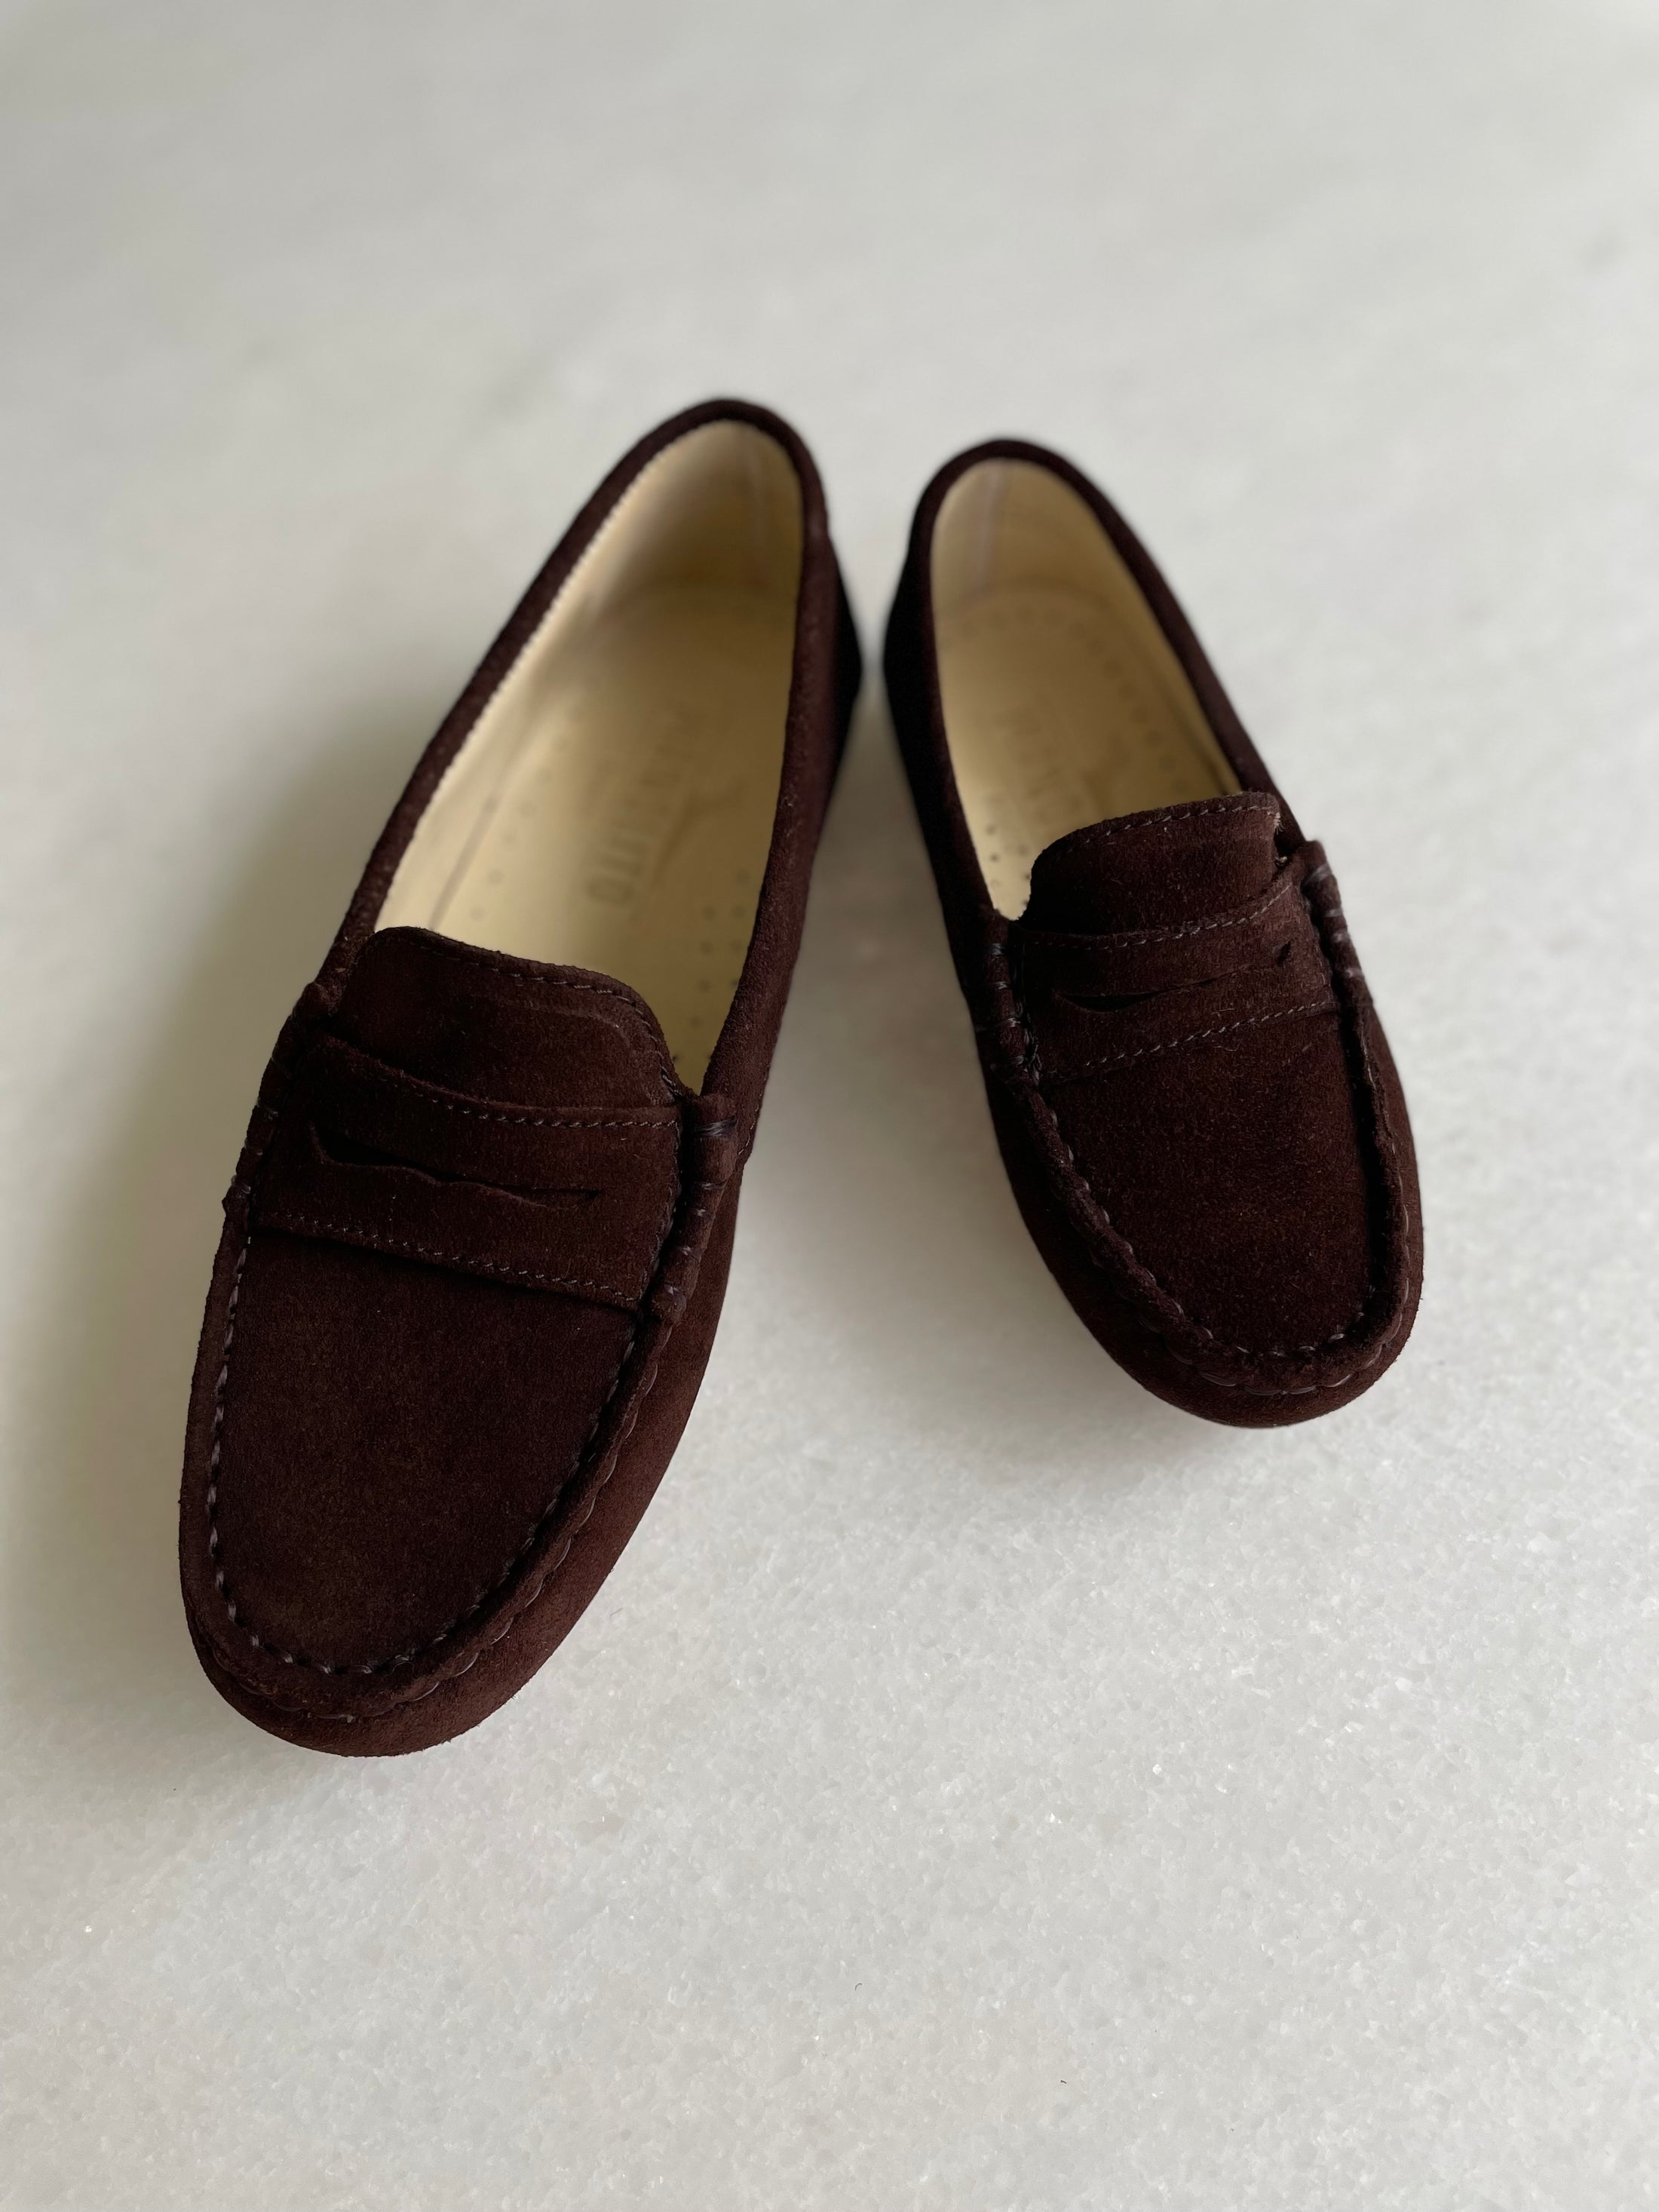 Chocolate suede loafers